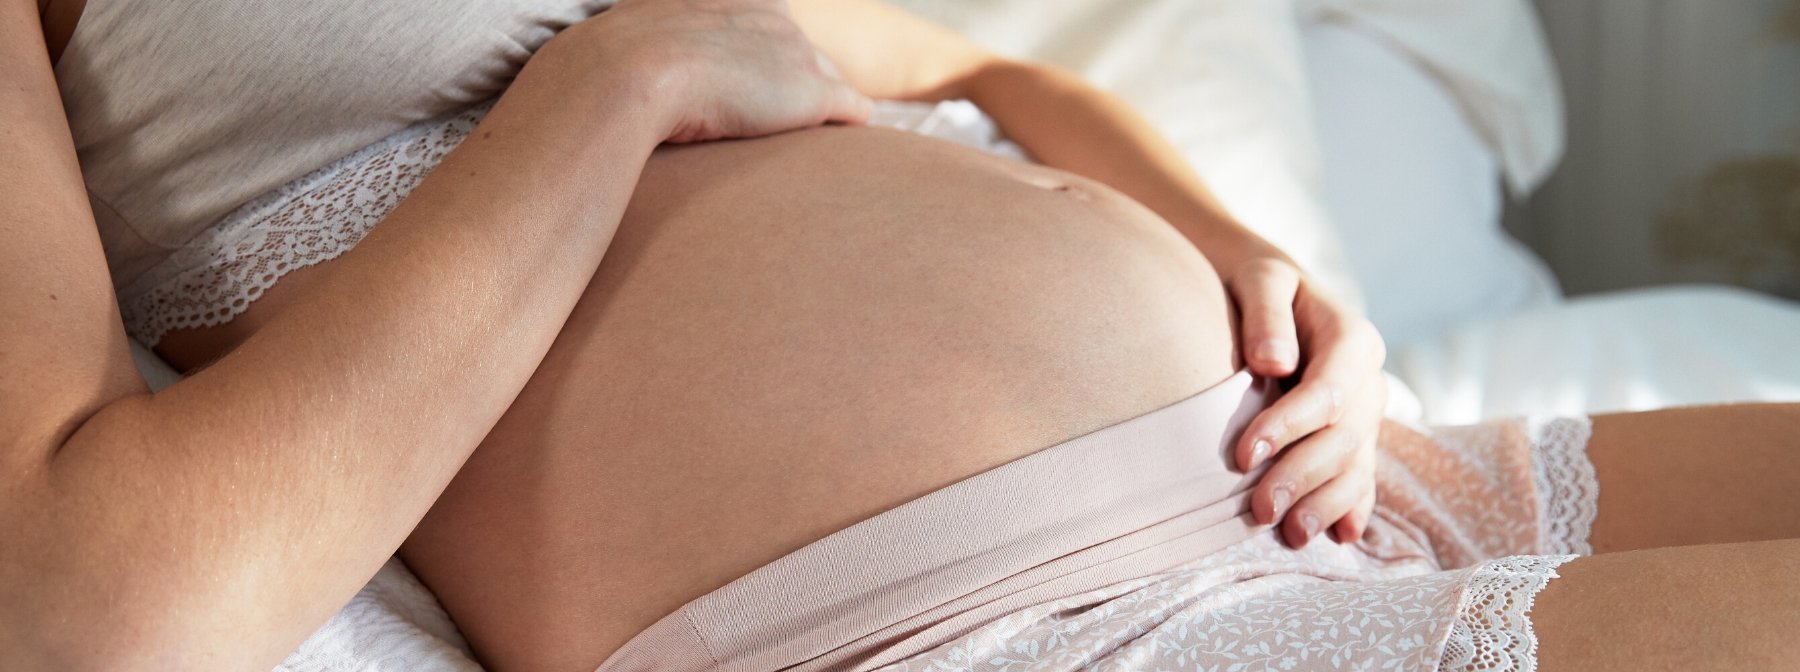 Can drinking alcohol during pregnancy hurt my baby?